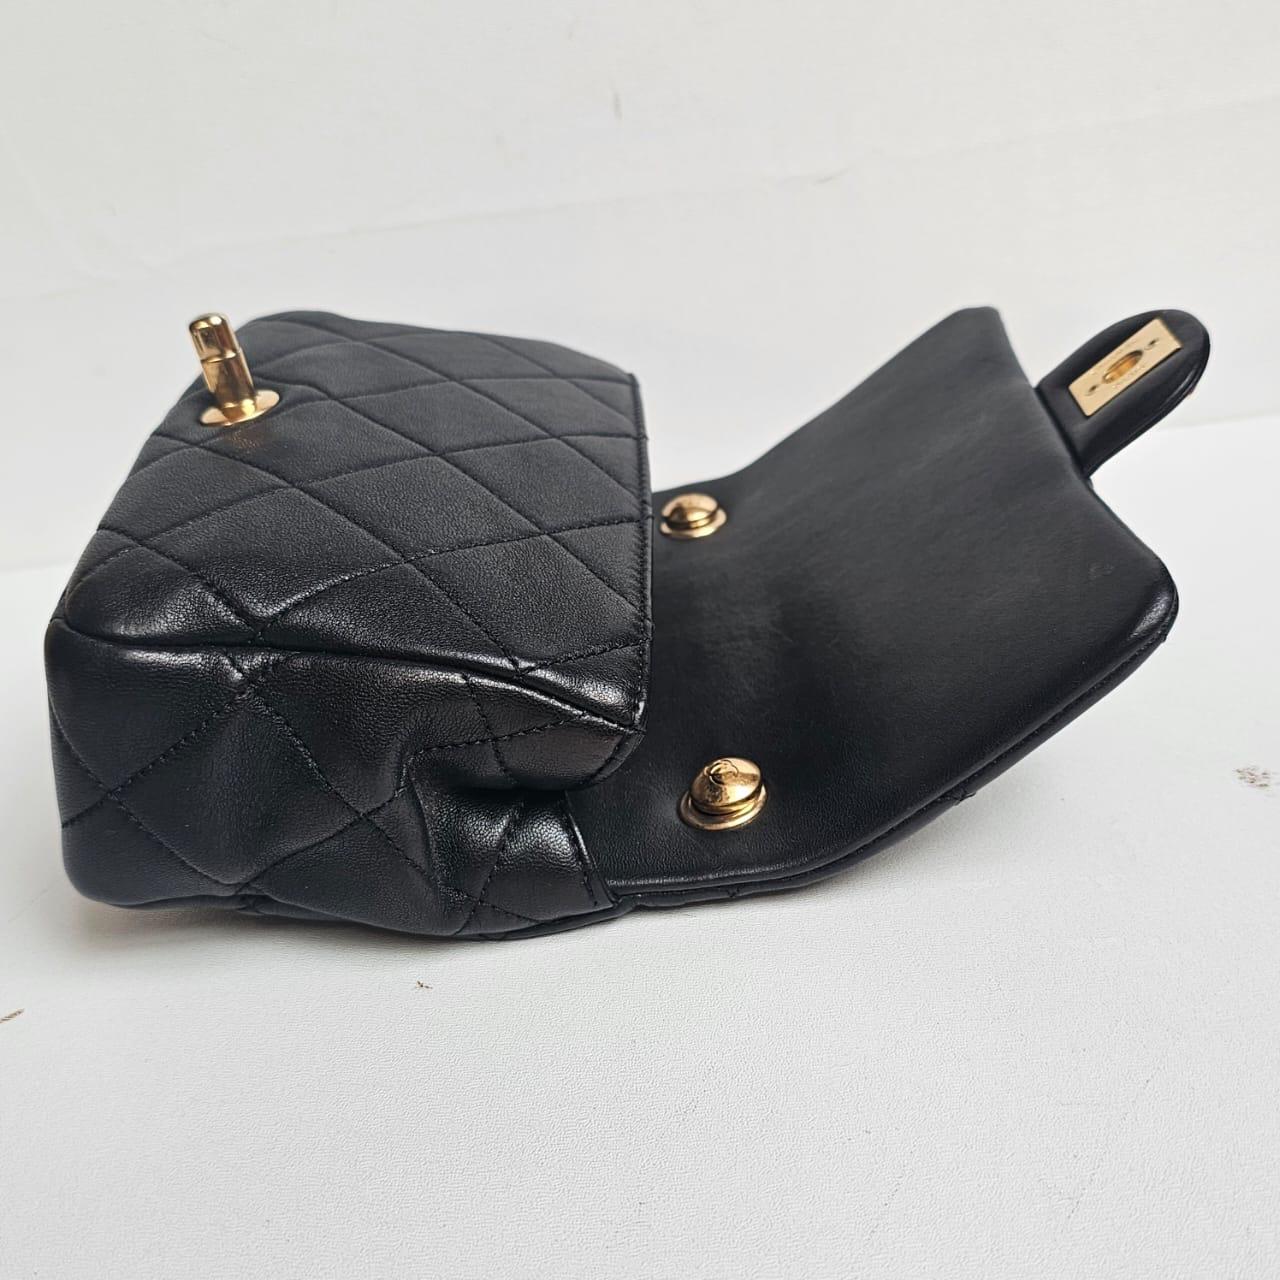 Chanel Mini Flap Bag with Circular Chain Top Handle Detail from recent collection. Already chipped. Item is overall still in good condition with light scratches and dirt marks due to wear. Unique design but top handle cant be removed. Comes with its